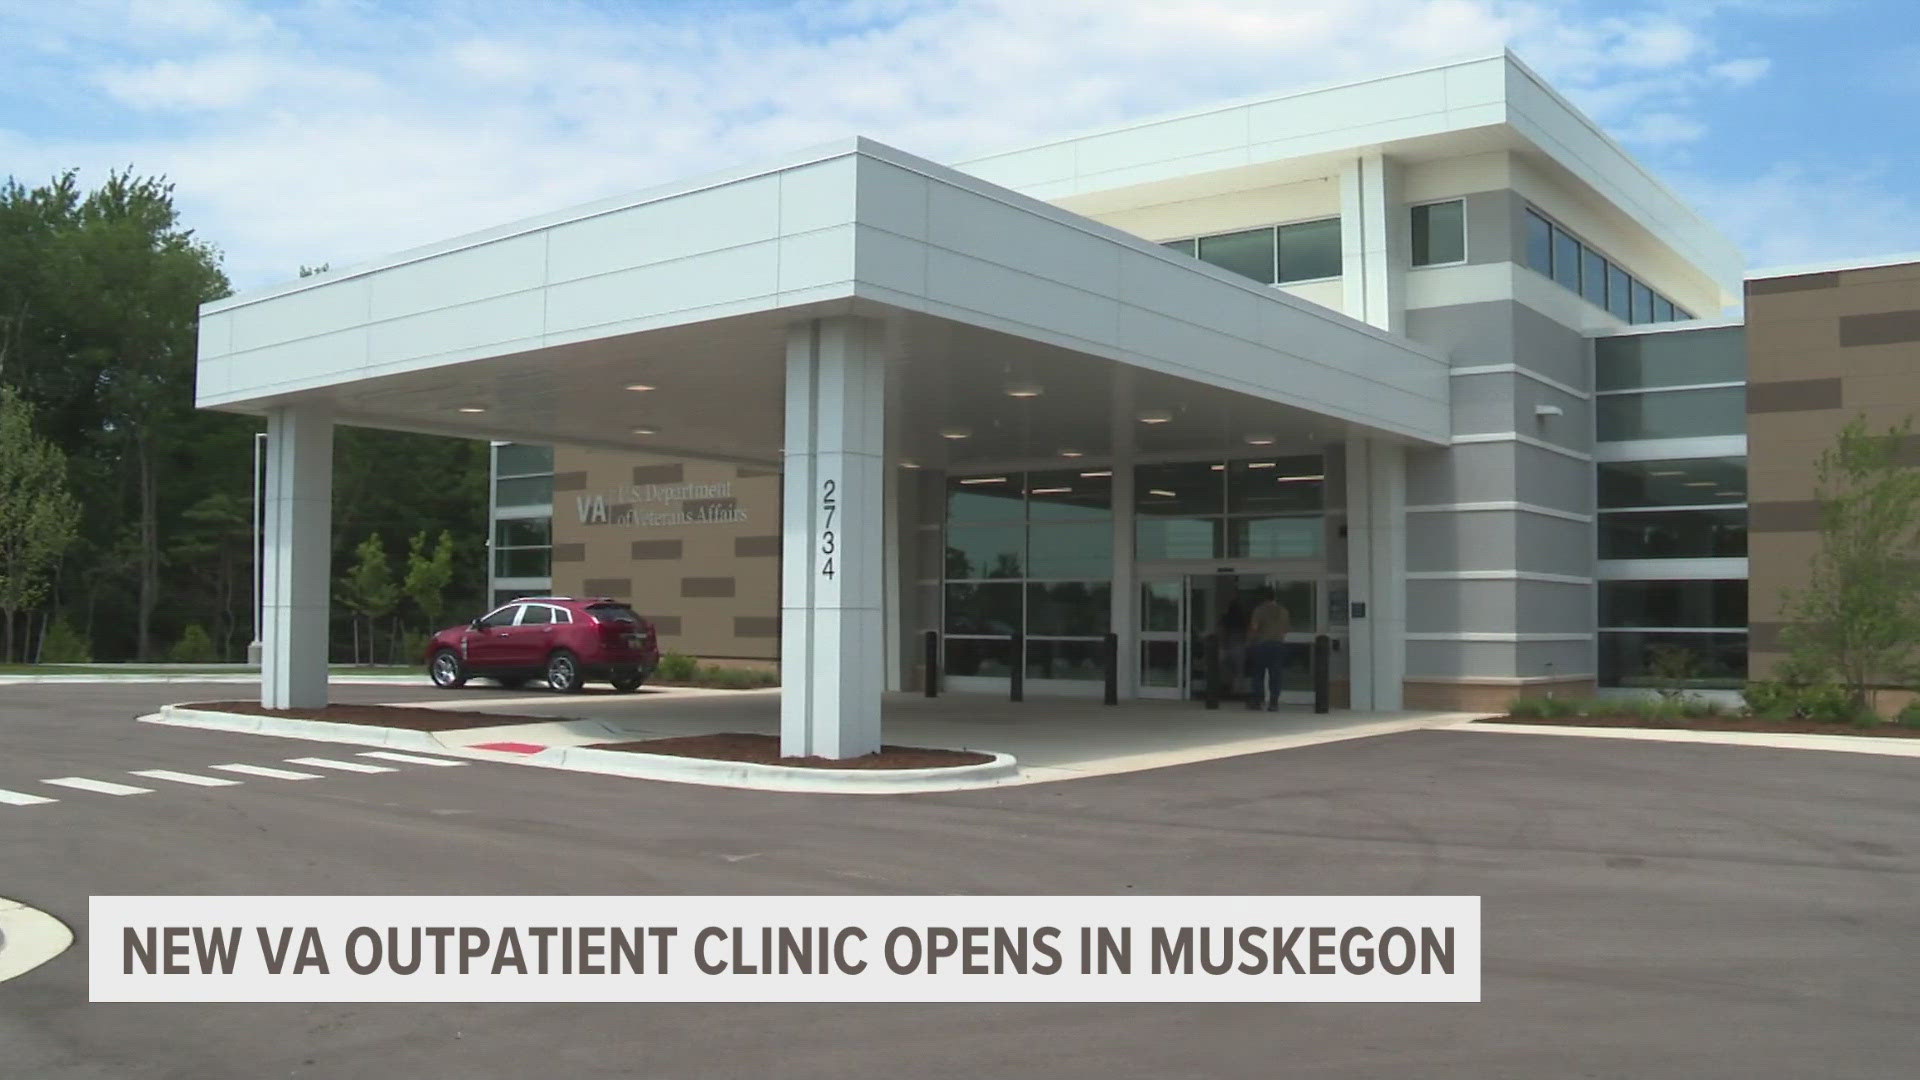 With an estimated 12,000 veterans living in Muskegon County, officials are aiming to cut back on wait times and serve more veterans in the area.